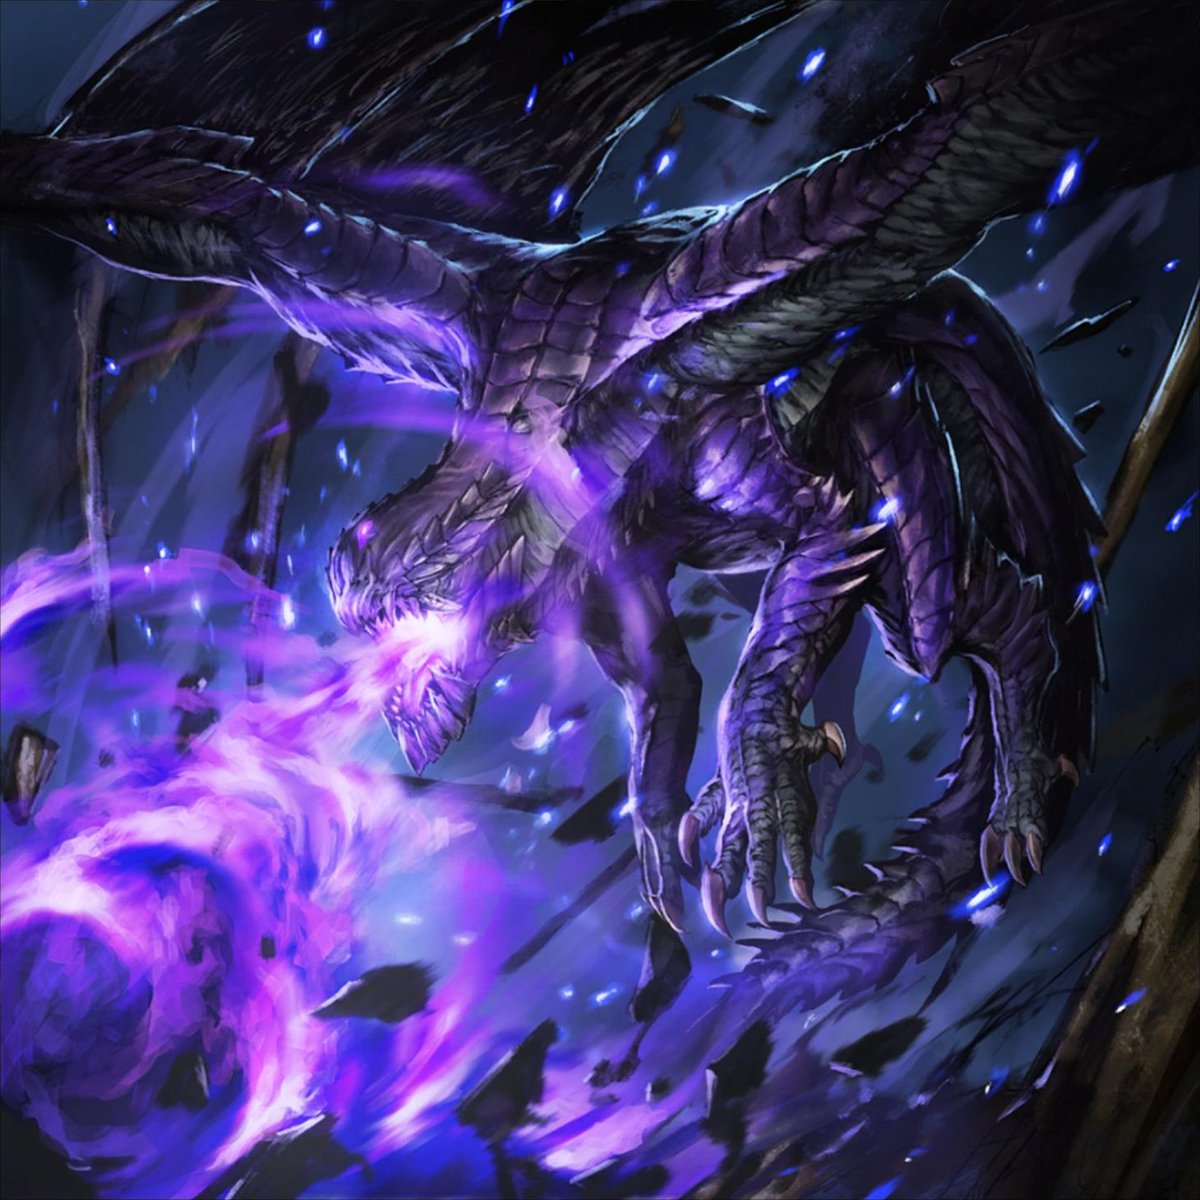 The Gore Magala unit card from this update looks really nice